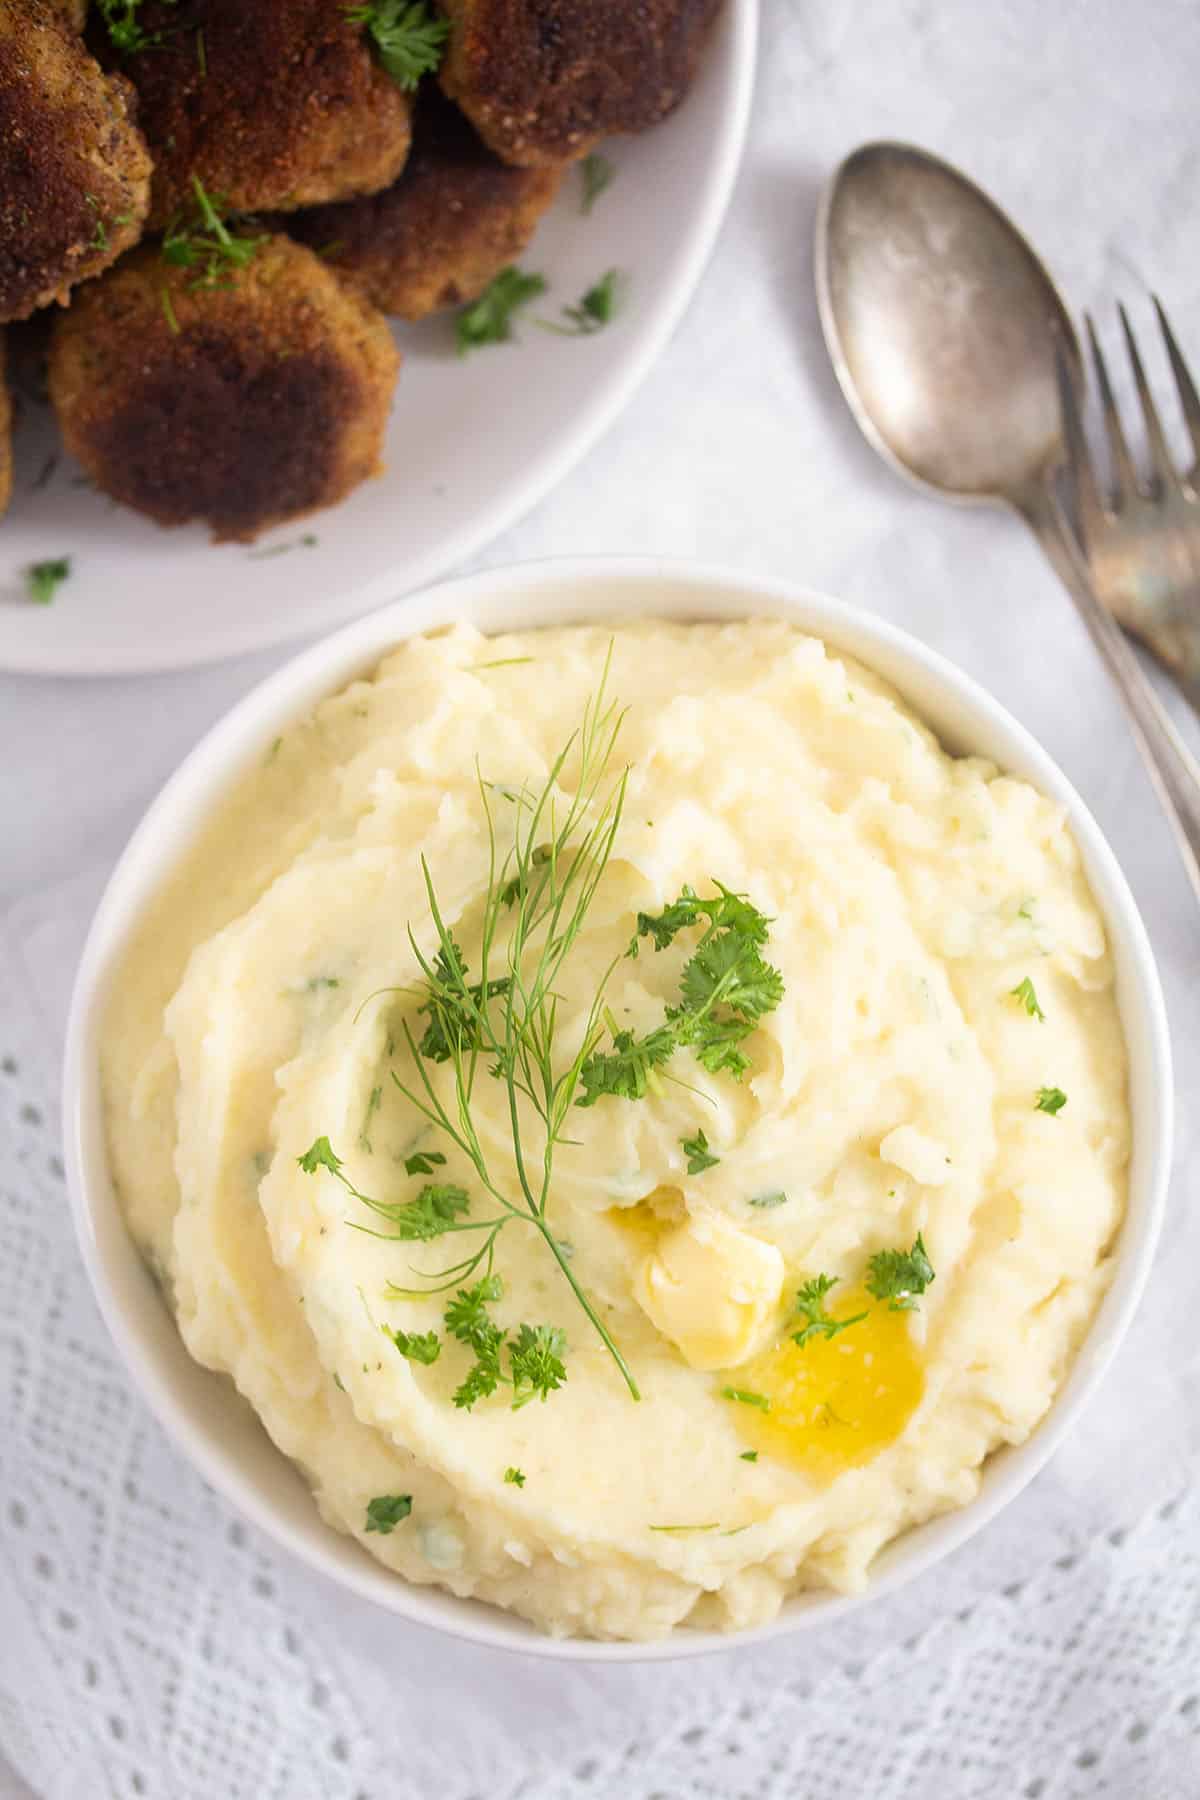 two bowls: one full of mashed potatoes and one with meatballs in it.